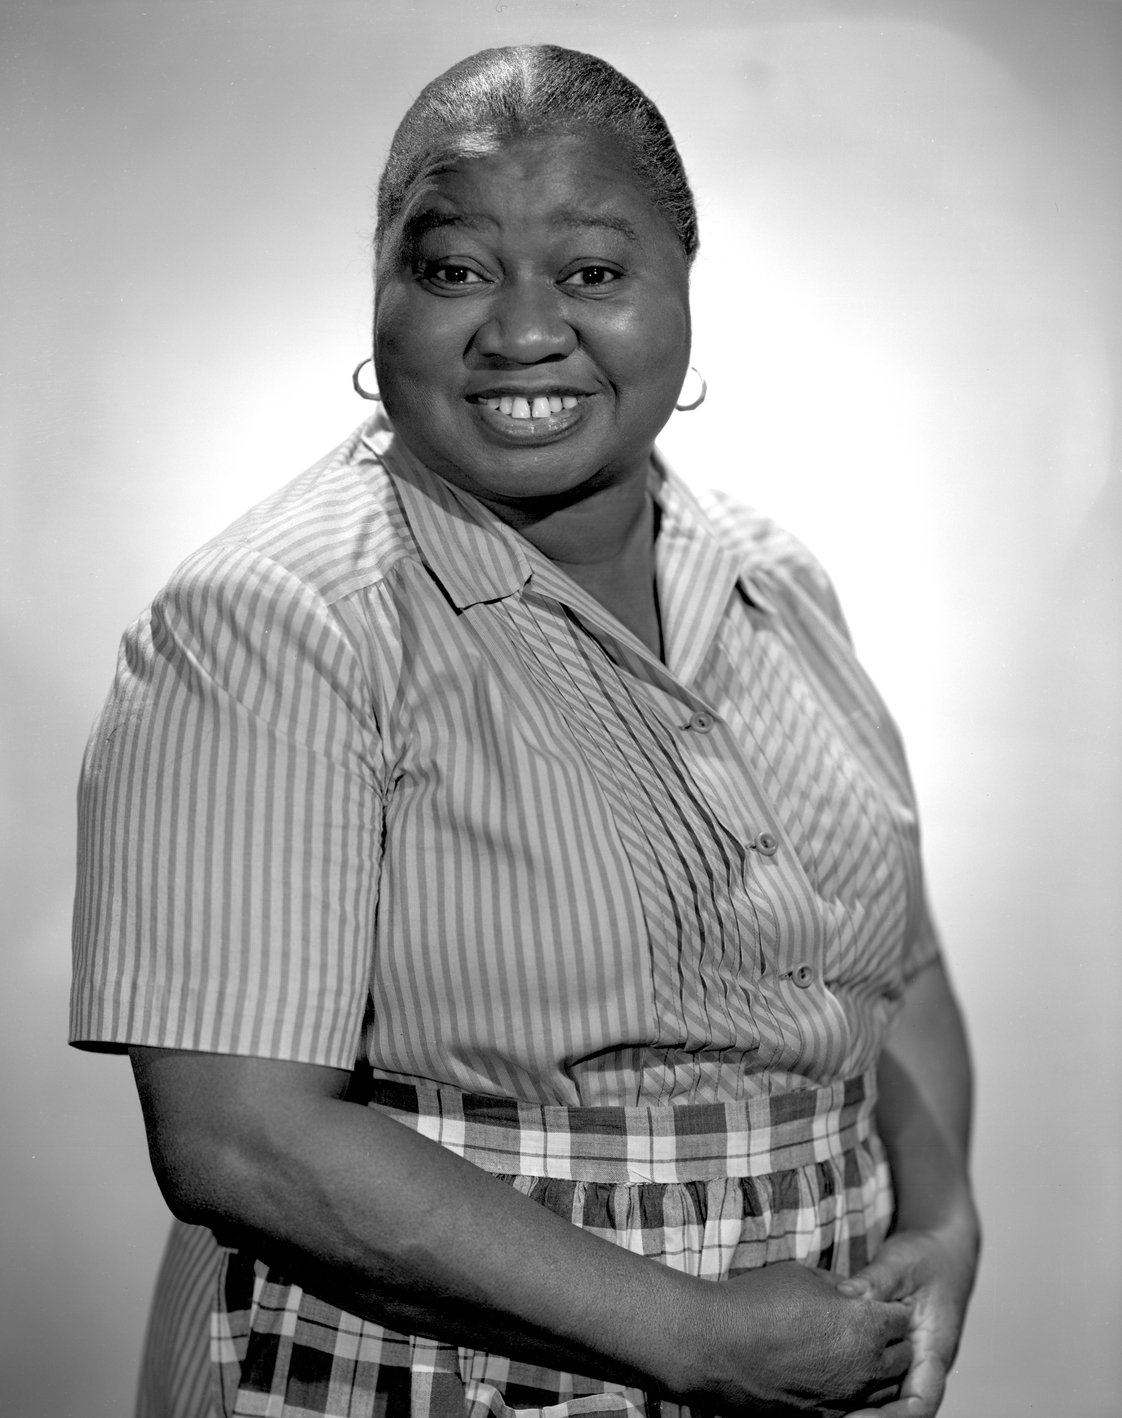 Hattie McDaniel from "The Beulah Show" on November 14, 1947. Hollywood, CA. | Source: Getty Images